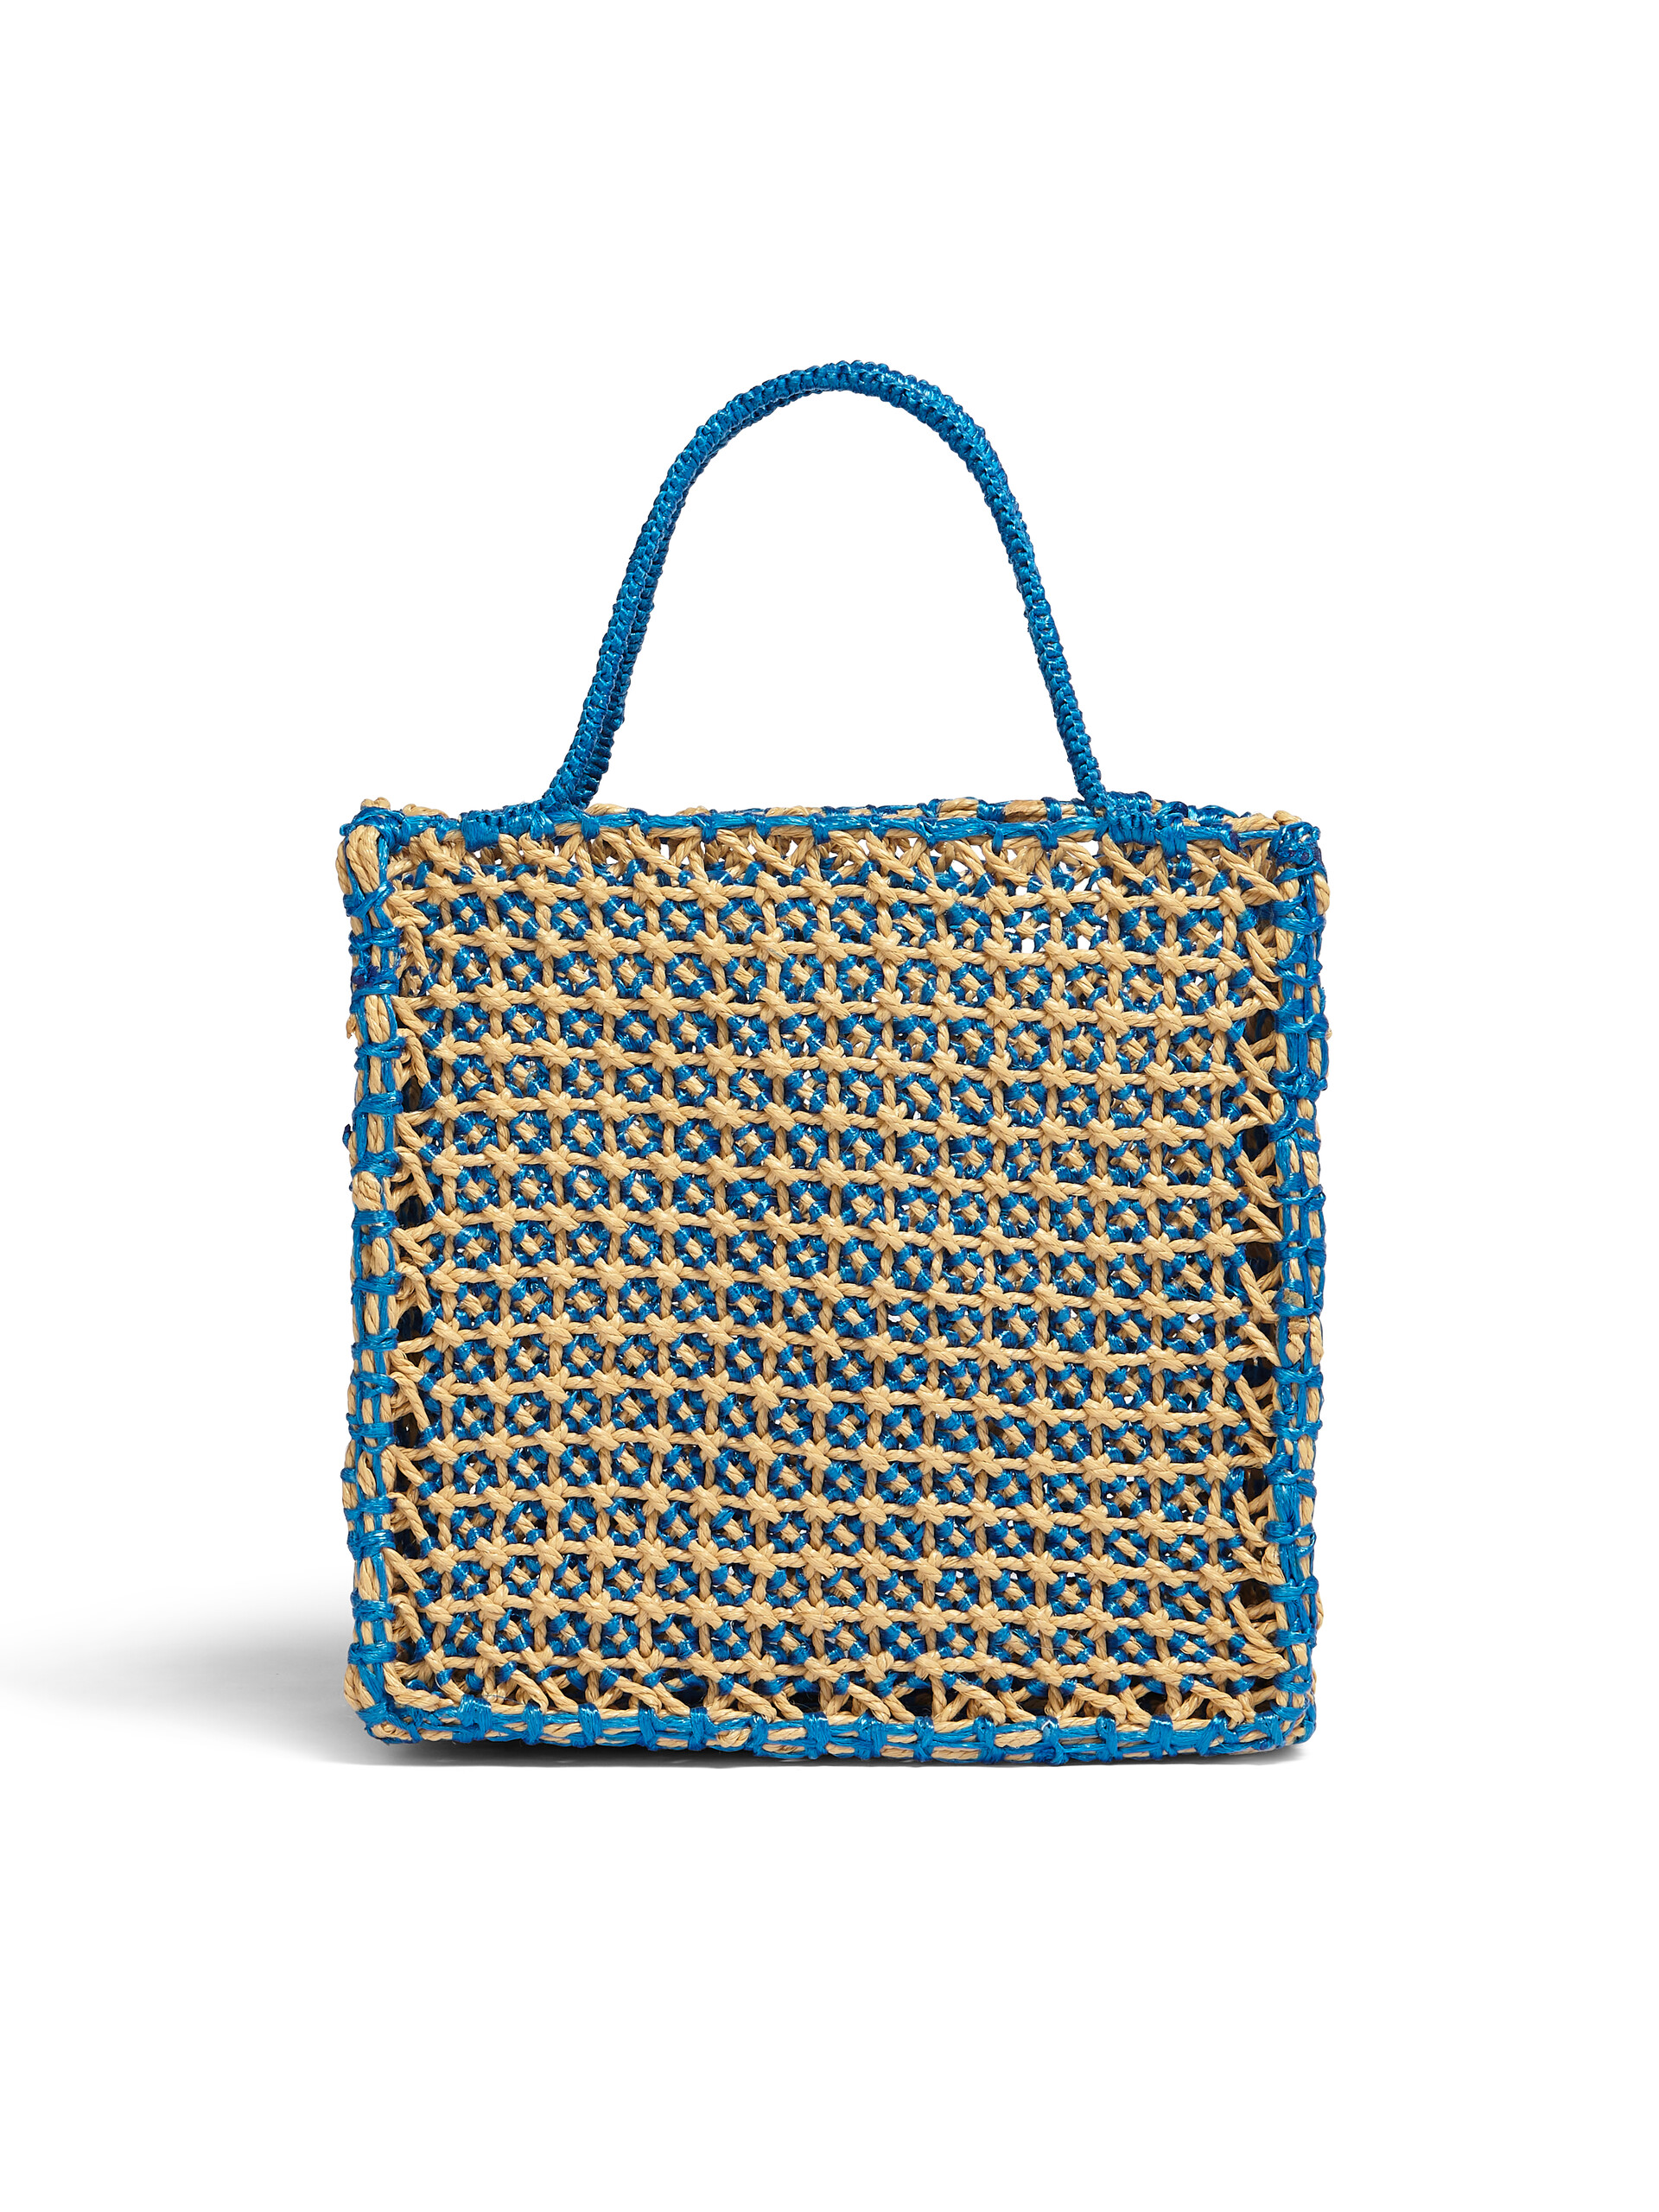 MARNI MARKET large bag in pale blue and beige crochet - Bags - Image 3